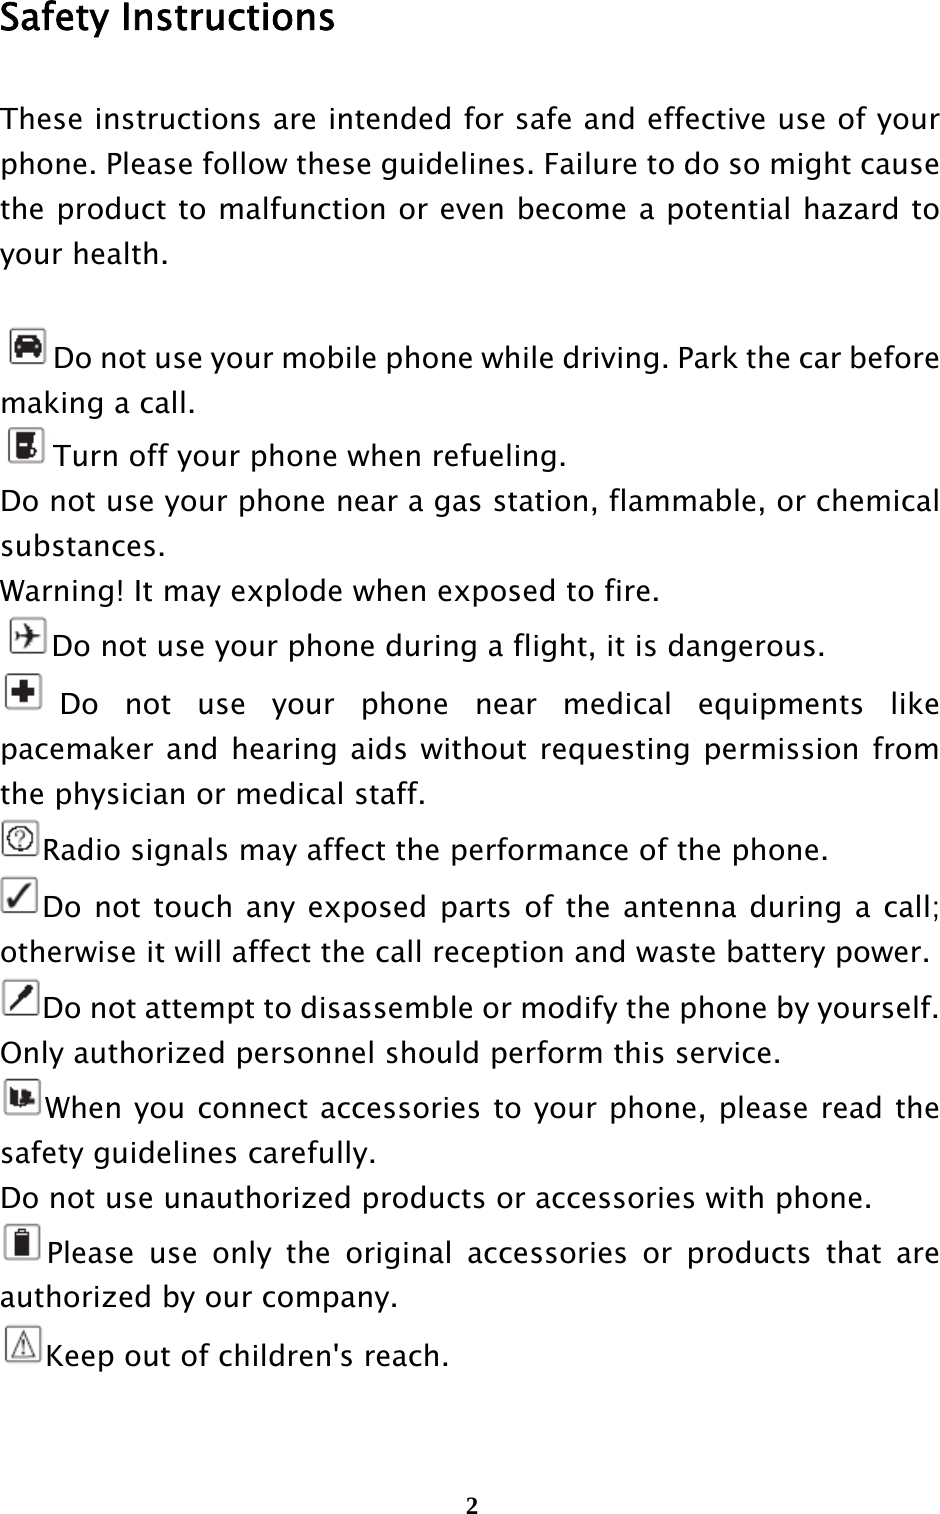  2Safety Instructions These instructions are intended for safe and effective use of your phone. Please follow these guidelines. Failure to do so might cause the product to malfunction or even become a potential hazard to your health.  Do not use your mobile phone while driving. Park the car before     making a call. Turn off your phone when refueling. Do not use your phone near a gas station, flammable, or chemical substances.  Warning! It may explode when exposed to fire. Do not use your phone during a flight, it is dangerous. Do not use your phone near medical equipments like pacemaker and hearing aids without requesting permission from the physician or medical staff. Radio signals may affect the performance of the phone. Do not touch any exposed parts of the antenna during a call; otherwise it will affect the call reception and waste battery power. Do not attempt to disassemble or modify the phone by yourself. Only authorized personnel should perform this service. When you connect accessories to your phone, please read the safety guidelines carefully. Do not use unauthorized products or accessories with phone. Please use only the original accessories or products that are authorized by our company. Keep out of children&apos;s reach.  